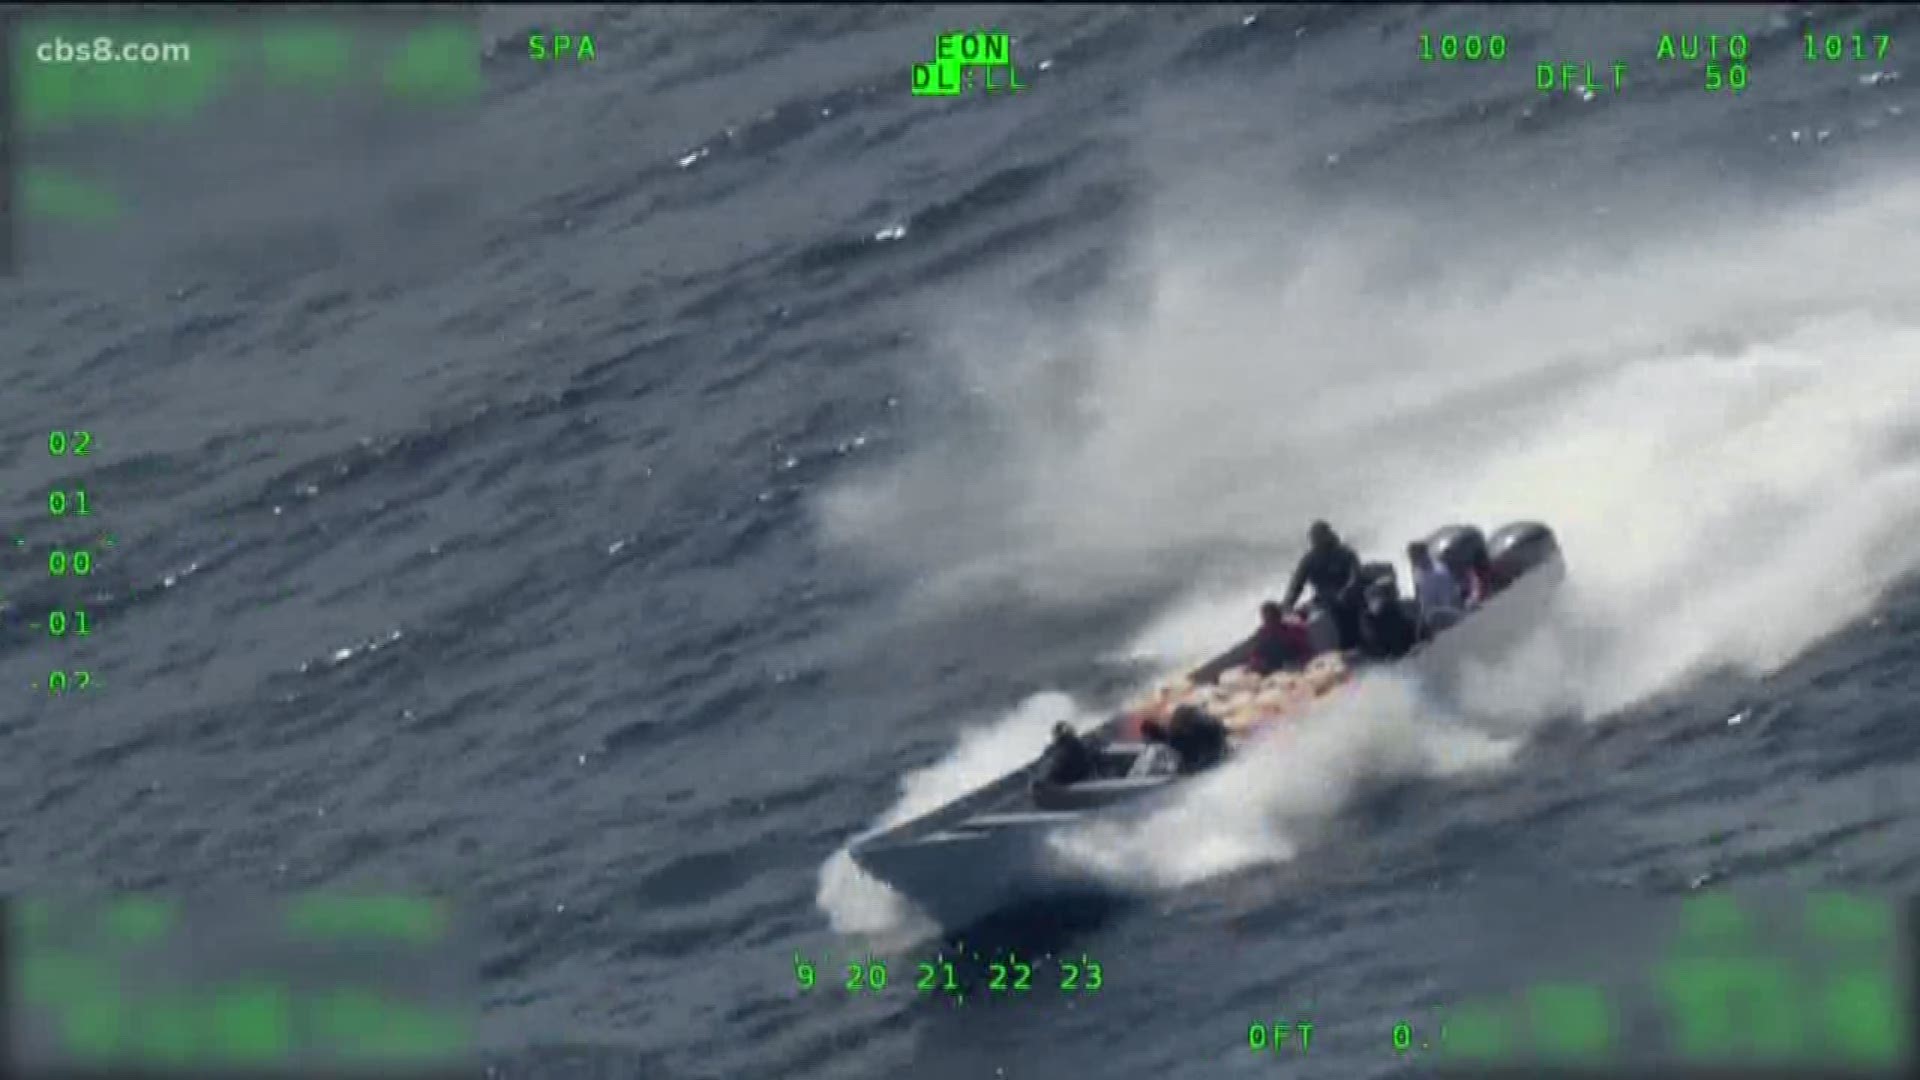 More than 13 tons of cocaine seized in international water of the eastern Pacific Ocean from late June to mid-July was offloaded in San Diego Friday by the Coast Guard Cutter Steadfast.